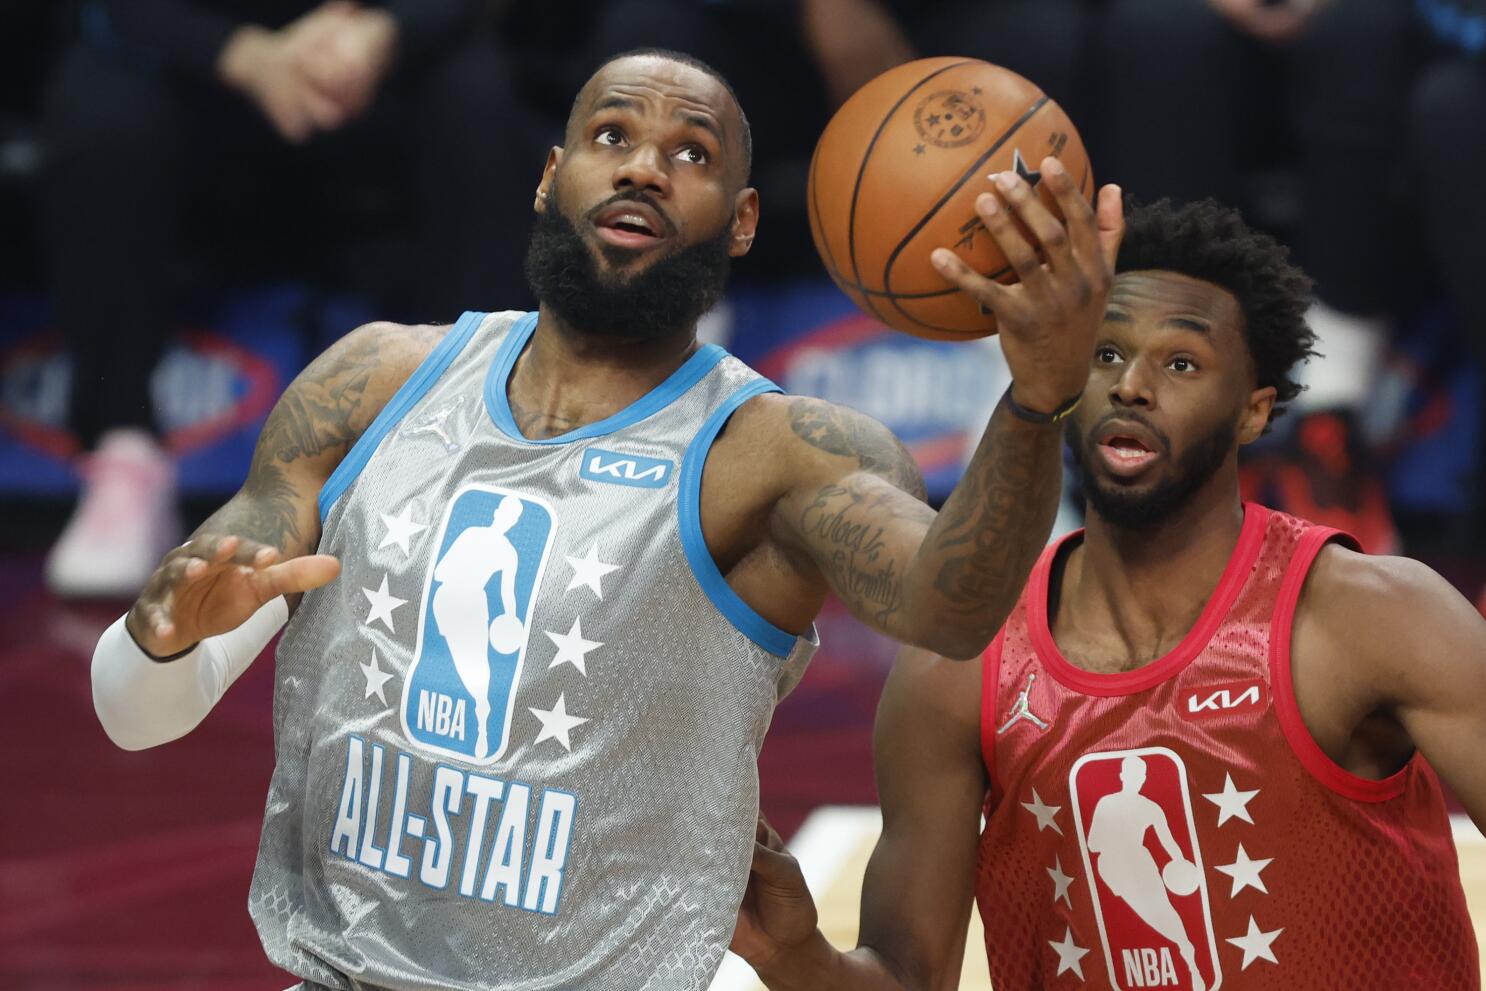 NBA All-Star Game: Team LeBron tops Team Steph with late defensive